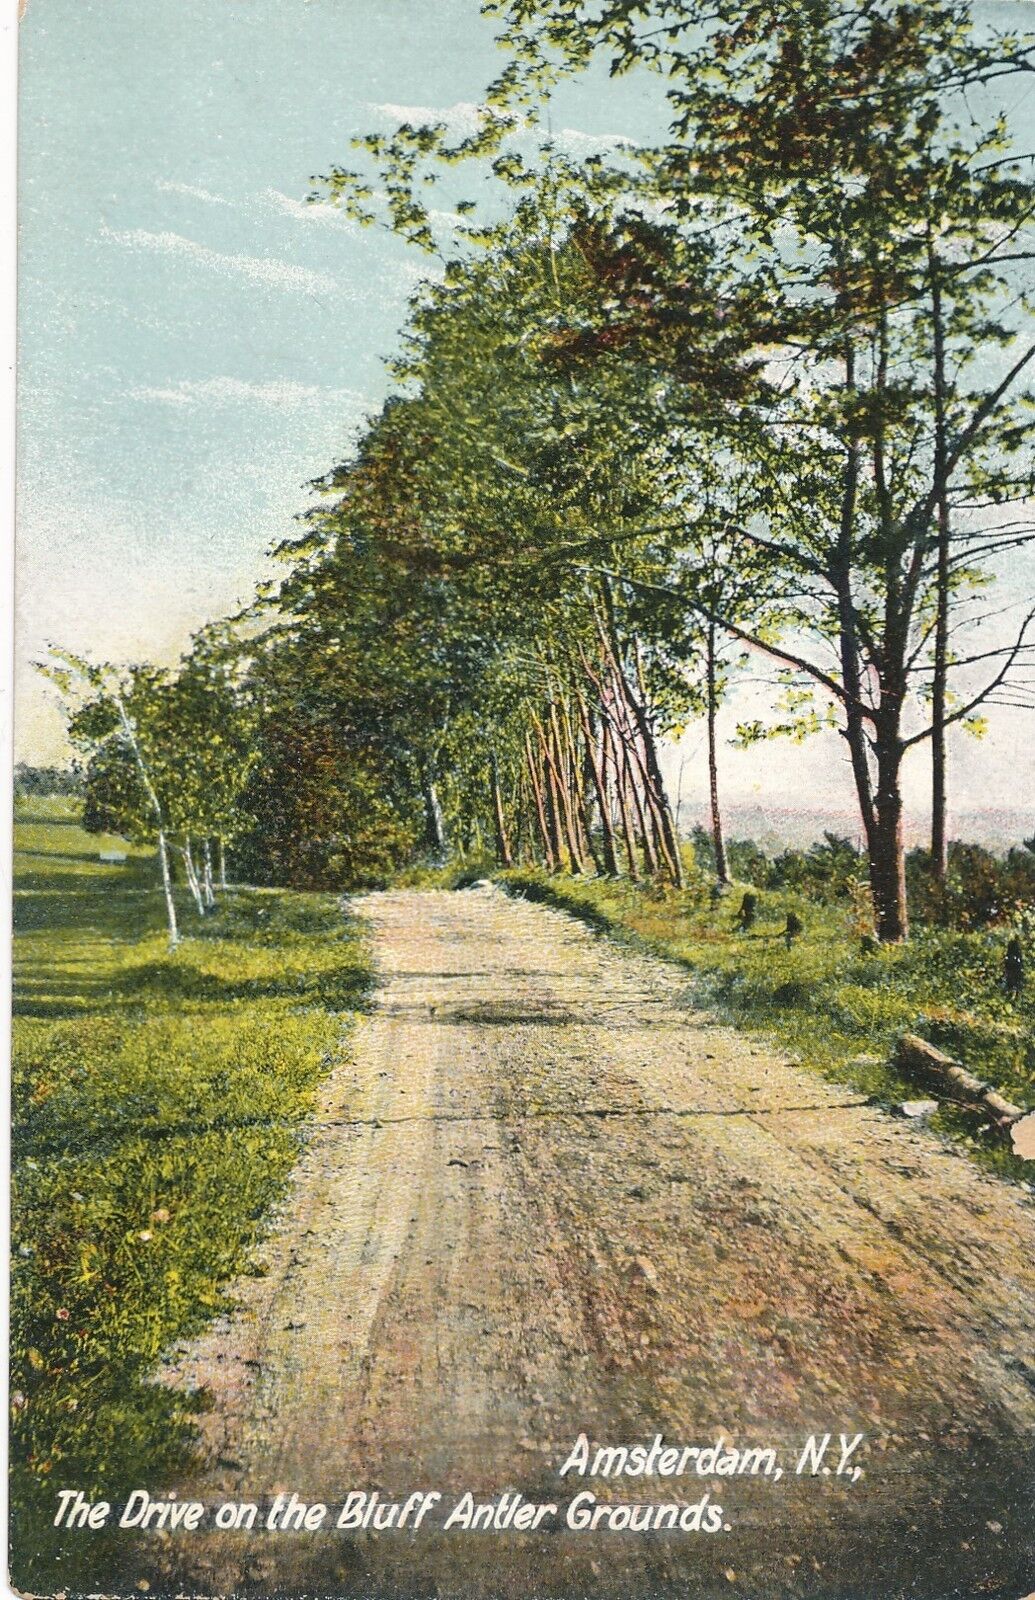 AMSTERDAM NY – The Drive On the Bluff Antler Grounds - udb (pre 1908)